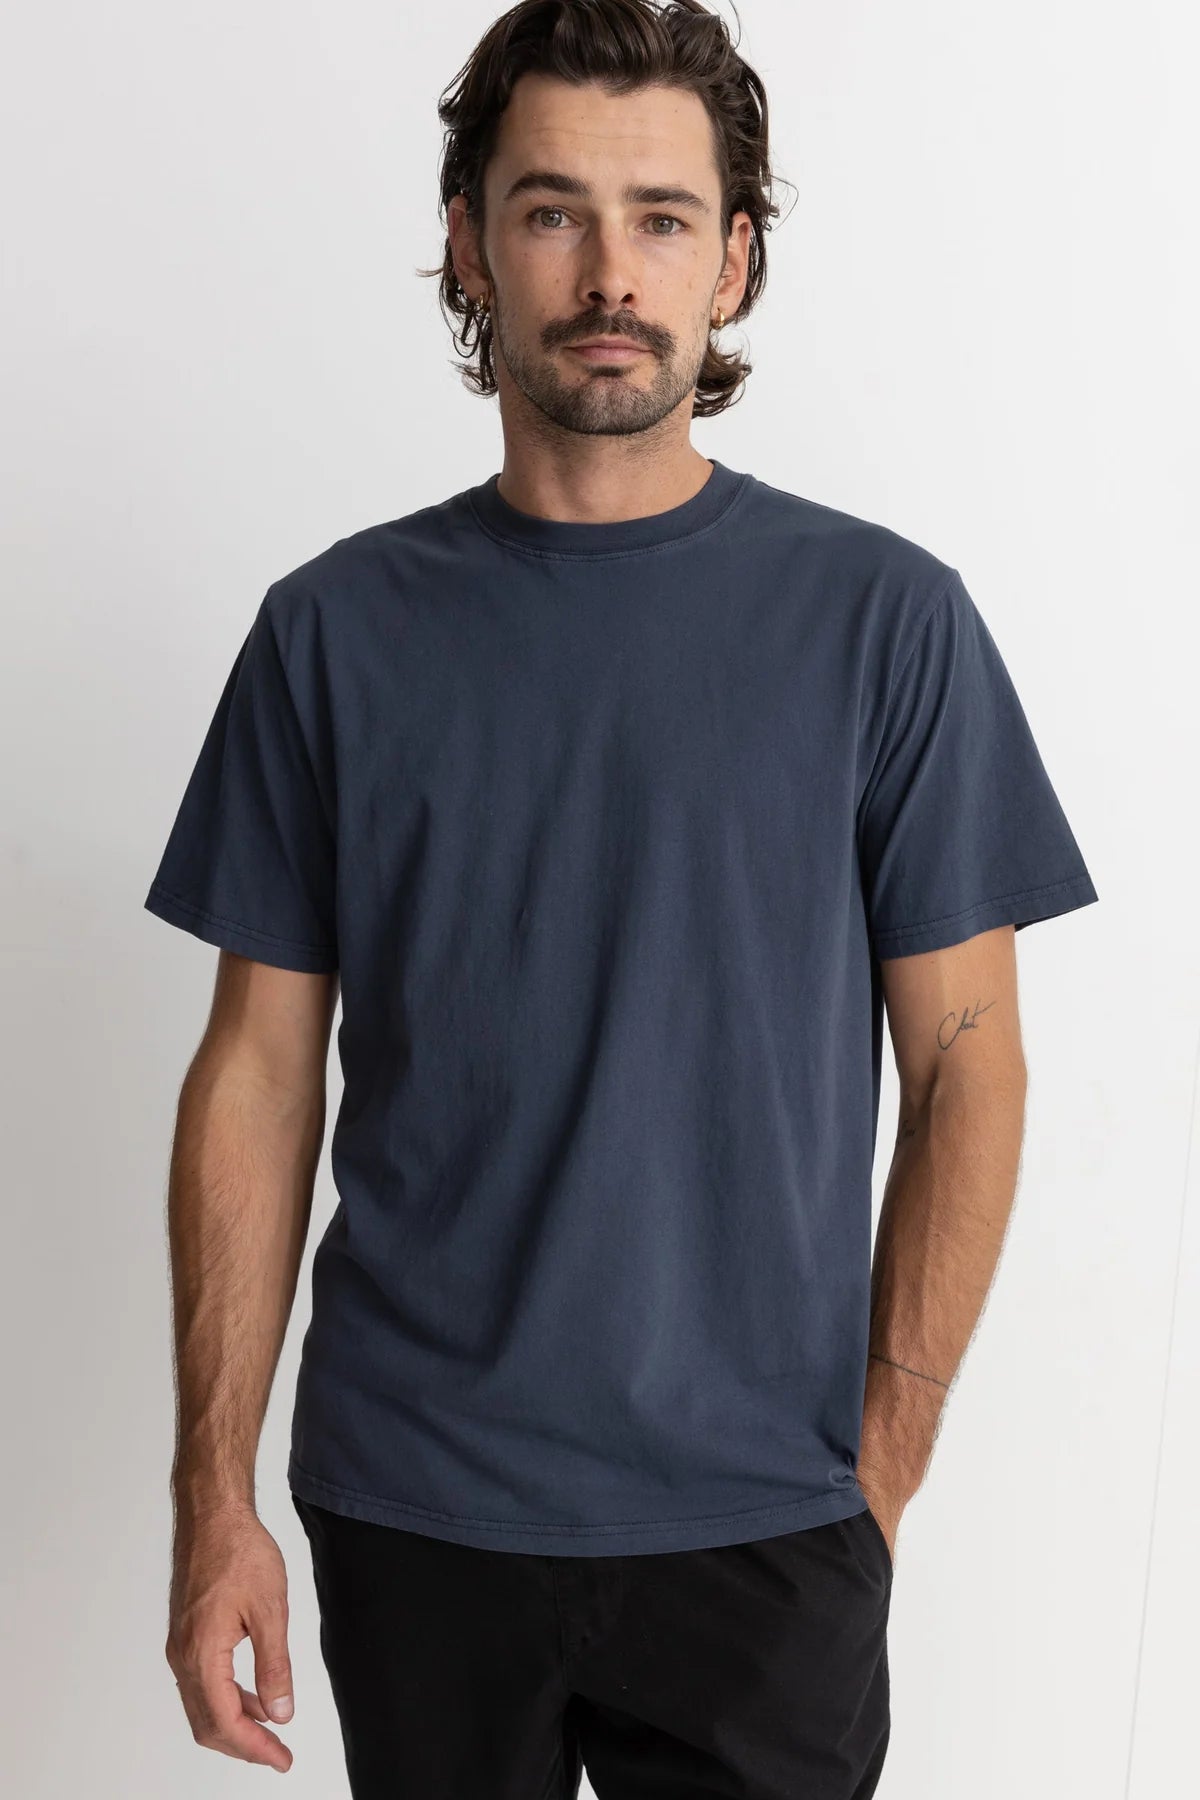 Front view of men's navy colored short sleeve tshirt